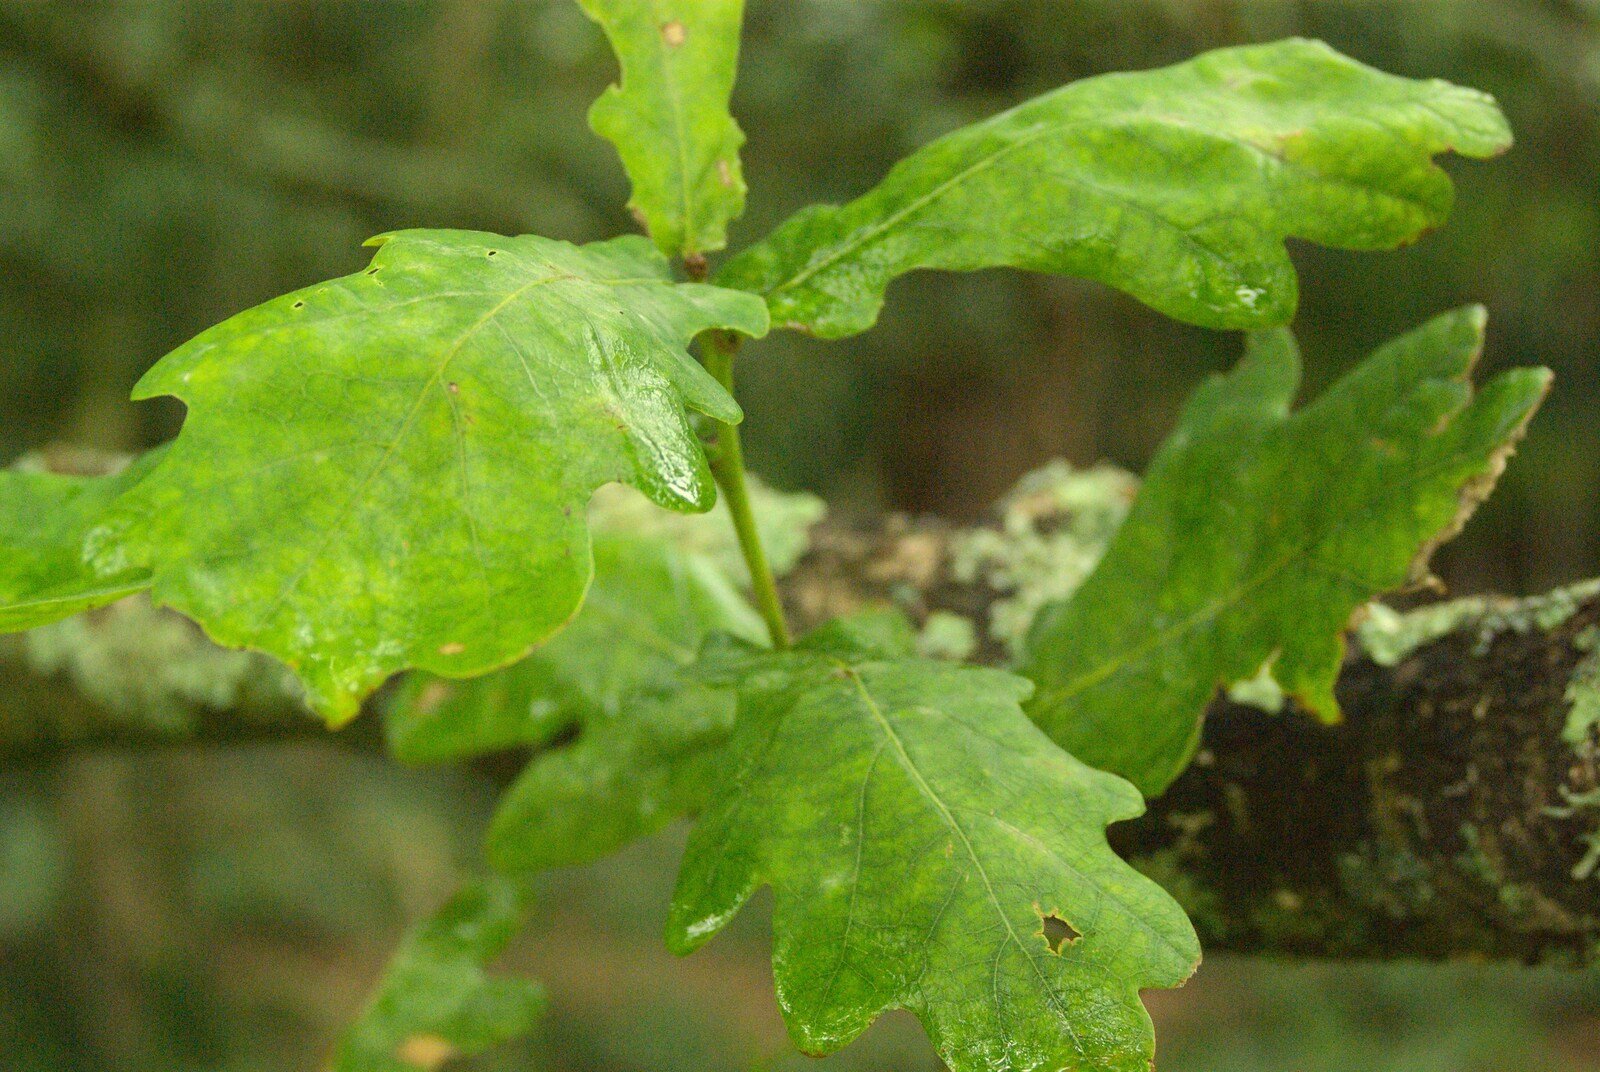 Wet oak leaves from A Camper Van Odyssey: Oxford, Salisbury, New Forest and Barton-on-Sea - 19th June 2011